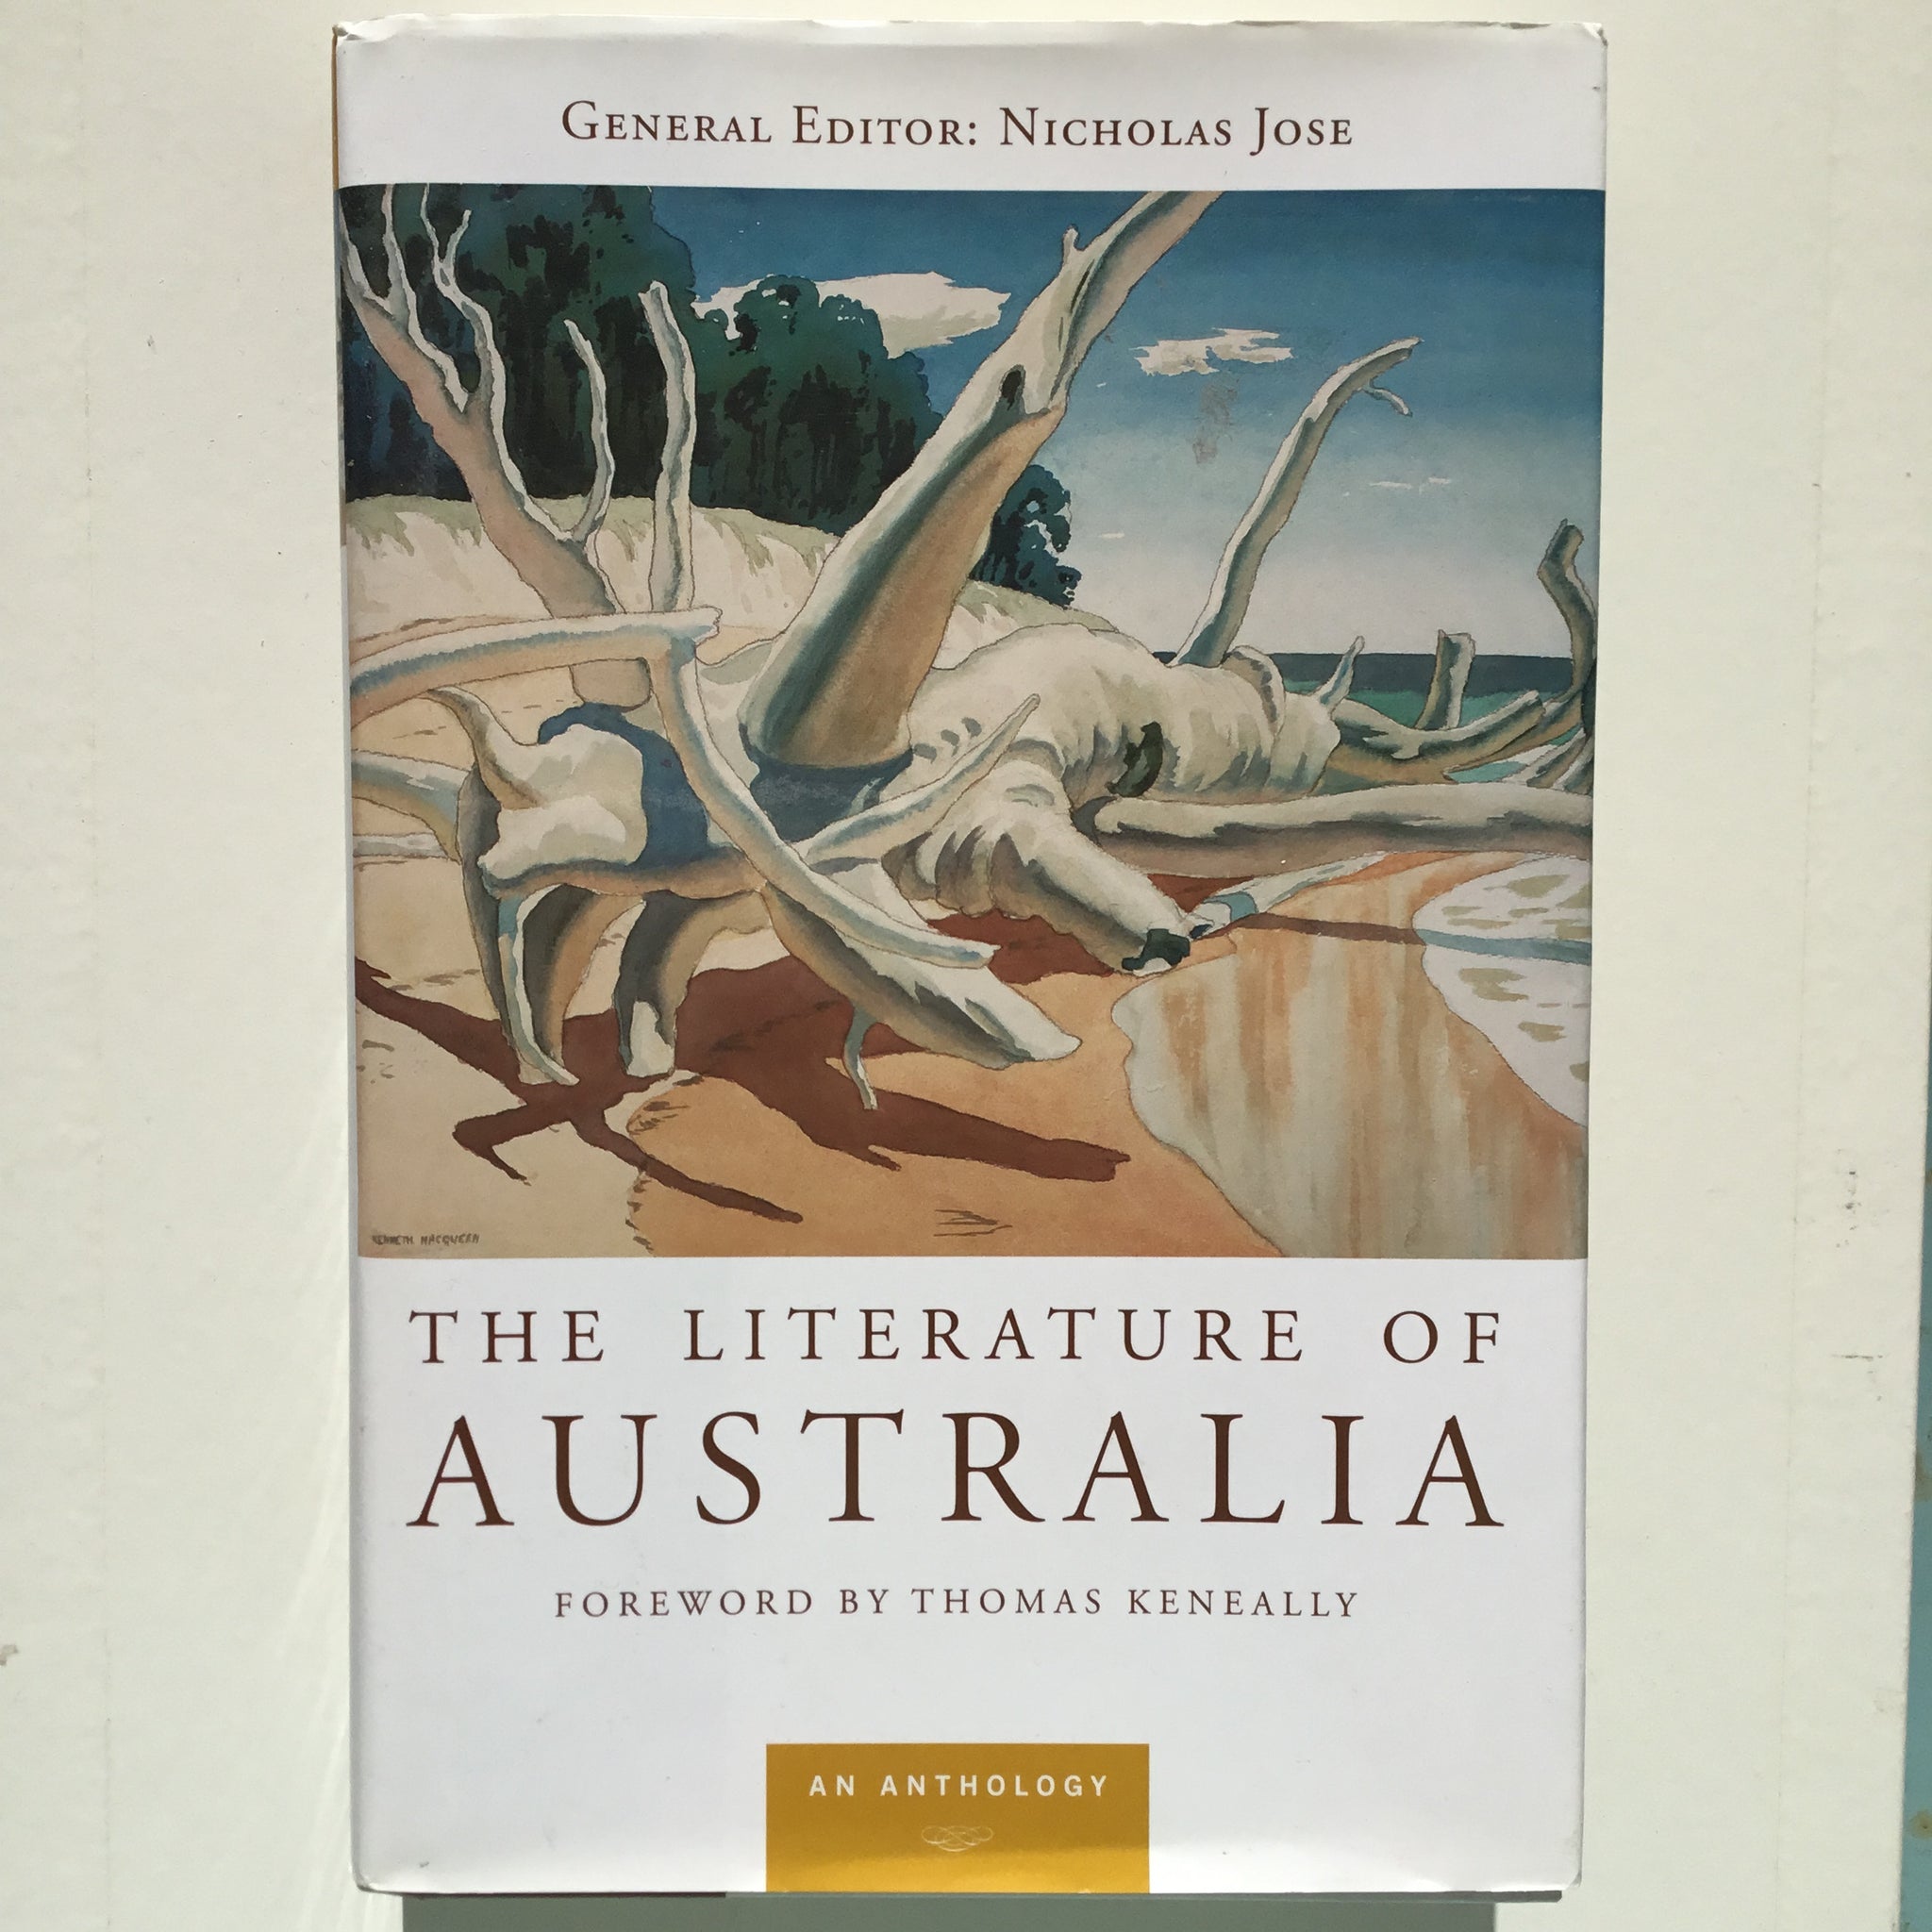 The Literature of Australia: An Anthology